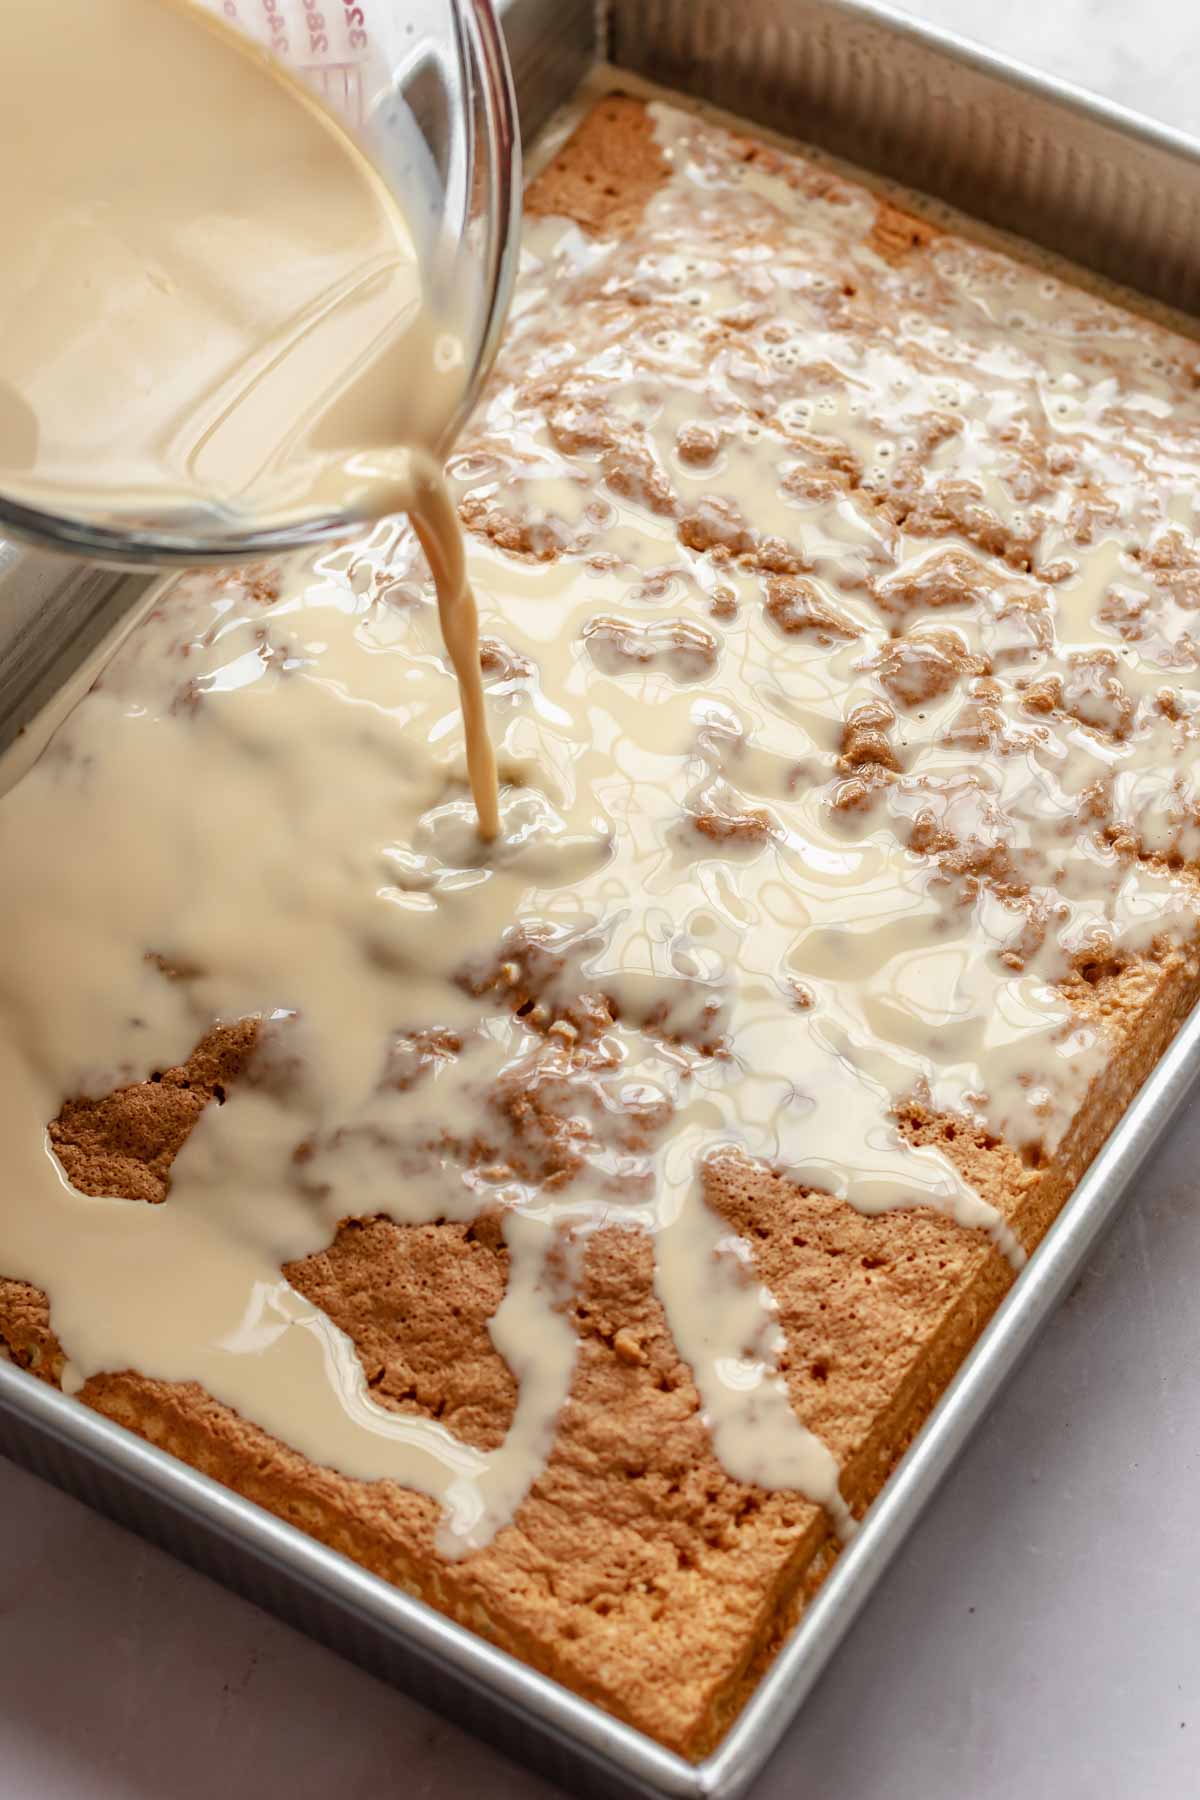 Caramel milk mixture pours on to the baked cake.